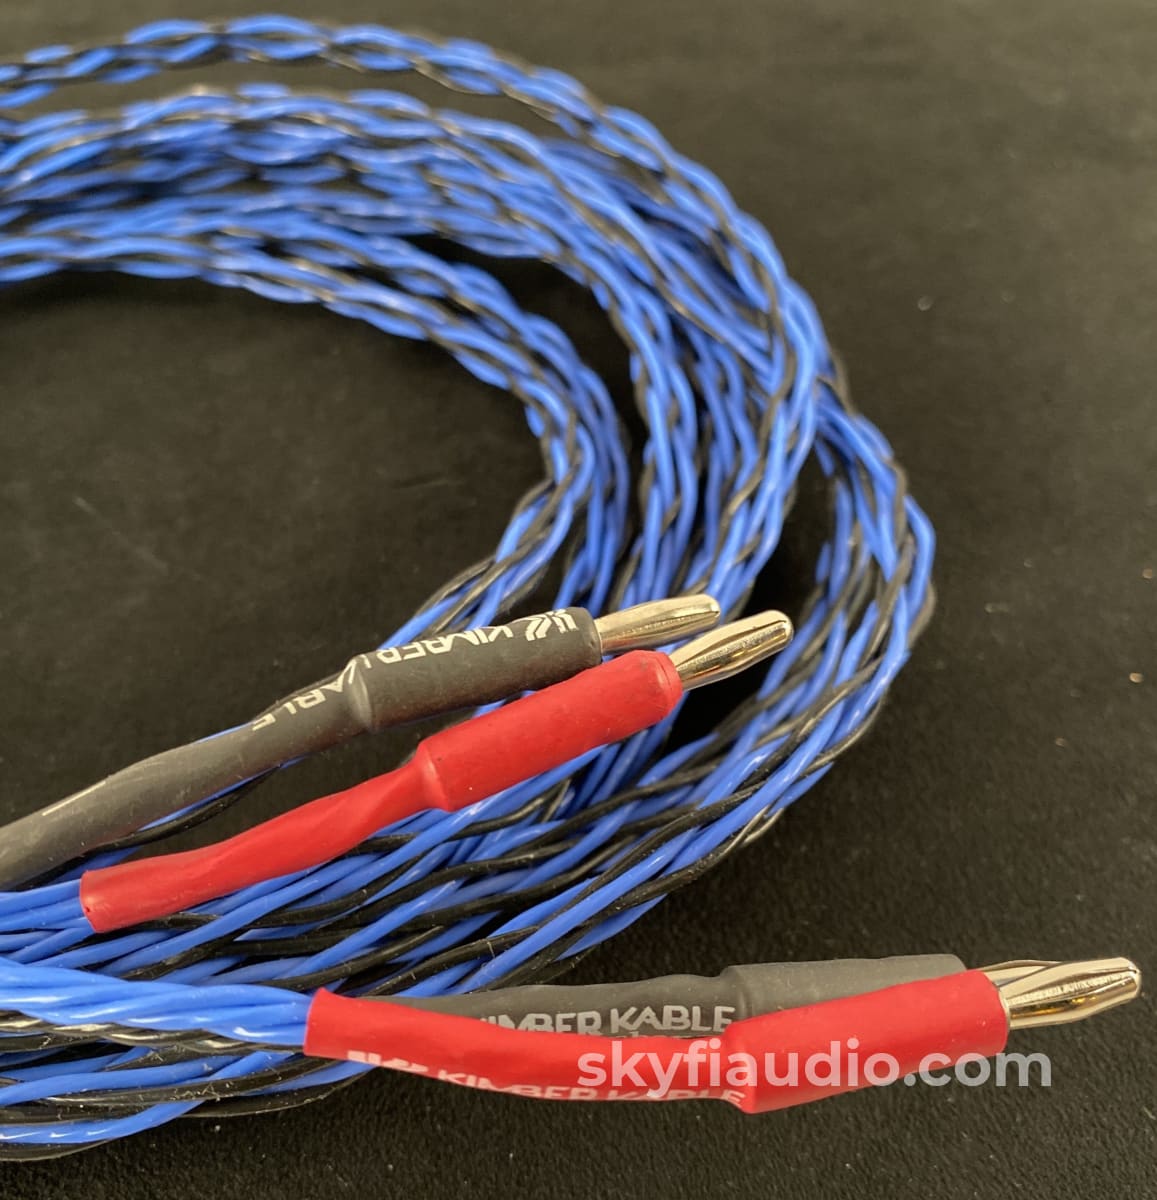 Kimber Kable 8Tc Speaker Cable With Bananas - 8 Cables